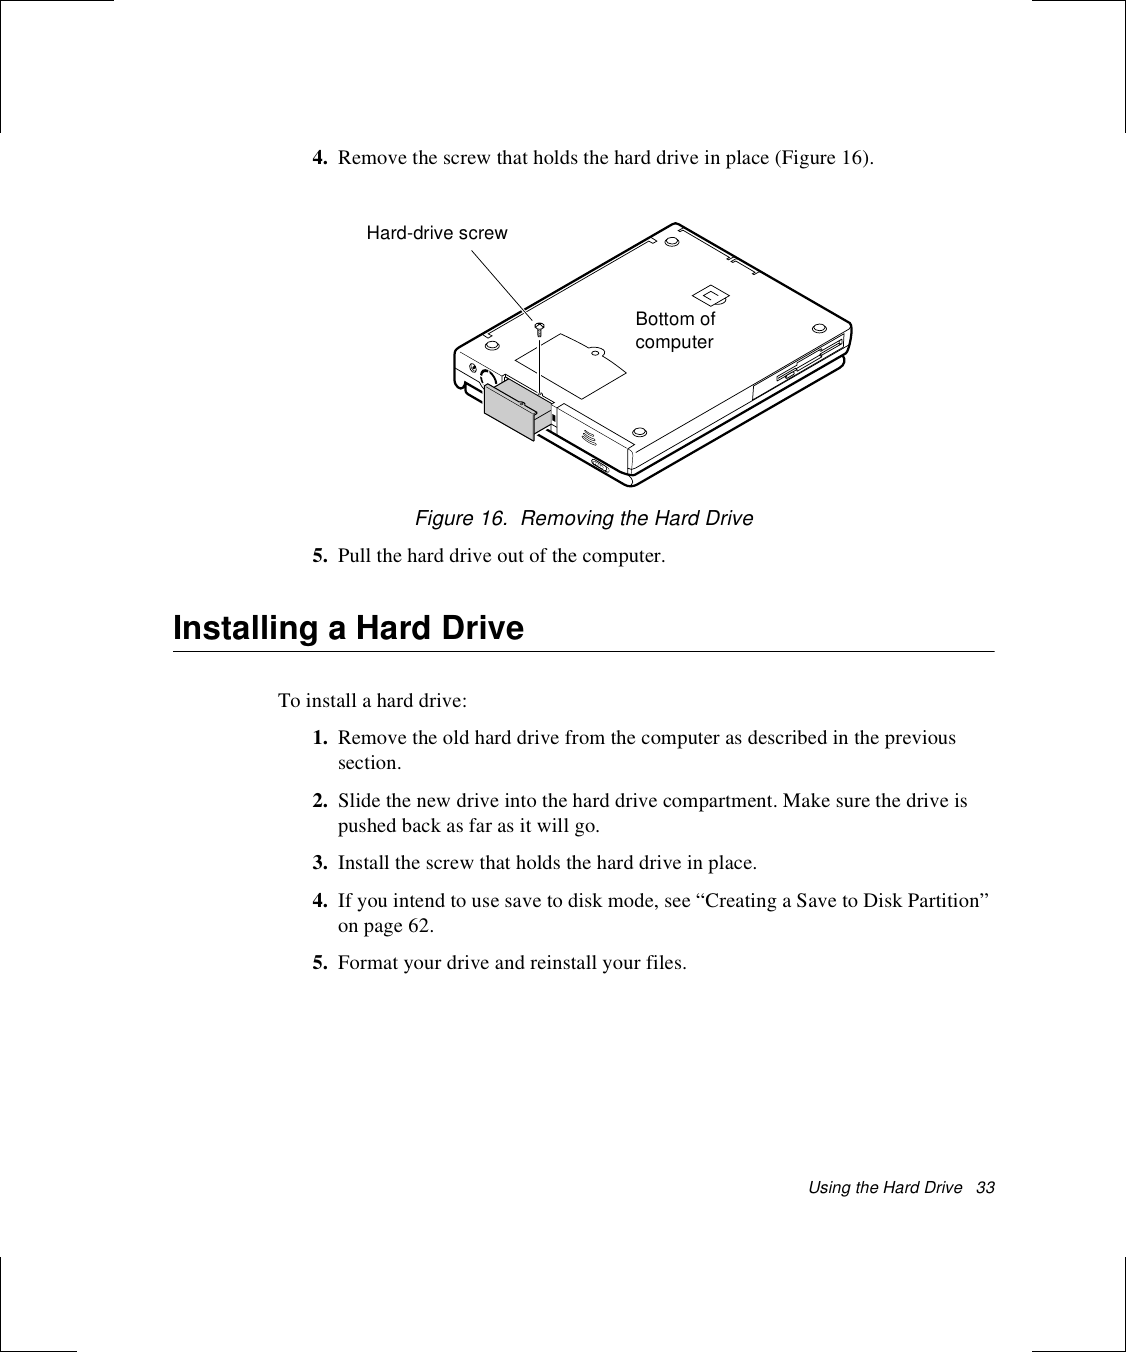 Using the Hard Drive   334. Remove the screw that holds the hard drive in place (Figure 16).Figure 16.  Removing the Hard Drive5. Pull the hard drive out of the computer.Installing a Hard DriveTo install a hard drive:1. Remove the old hard drive from the computer as described in the previous section.2. Slide the new drive into the hard drive compartment. Make sure the drive is pushed back as far as it will go.3. Install the screw that holds the hard drive in place.4. If you intend to use save to disk mode, see “Creating a Save to Disk Partition” on page 62.5. Format your drive and reinstall your files. Hard-drive screwBottom of computer